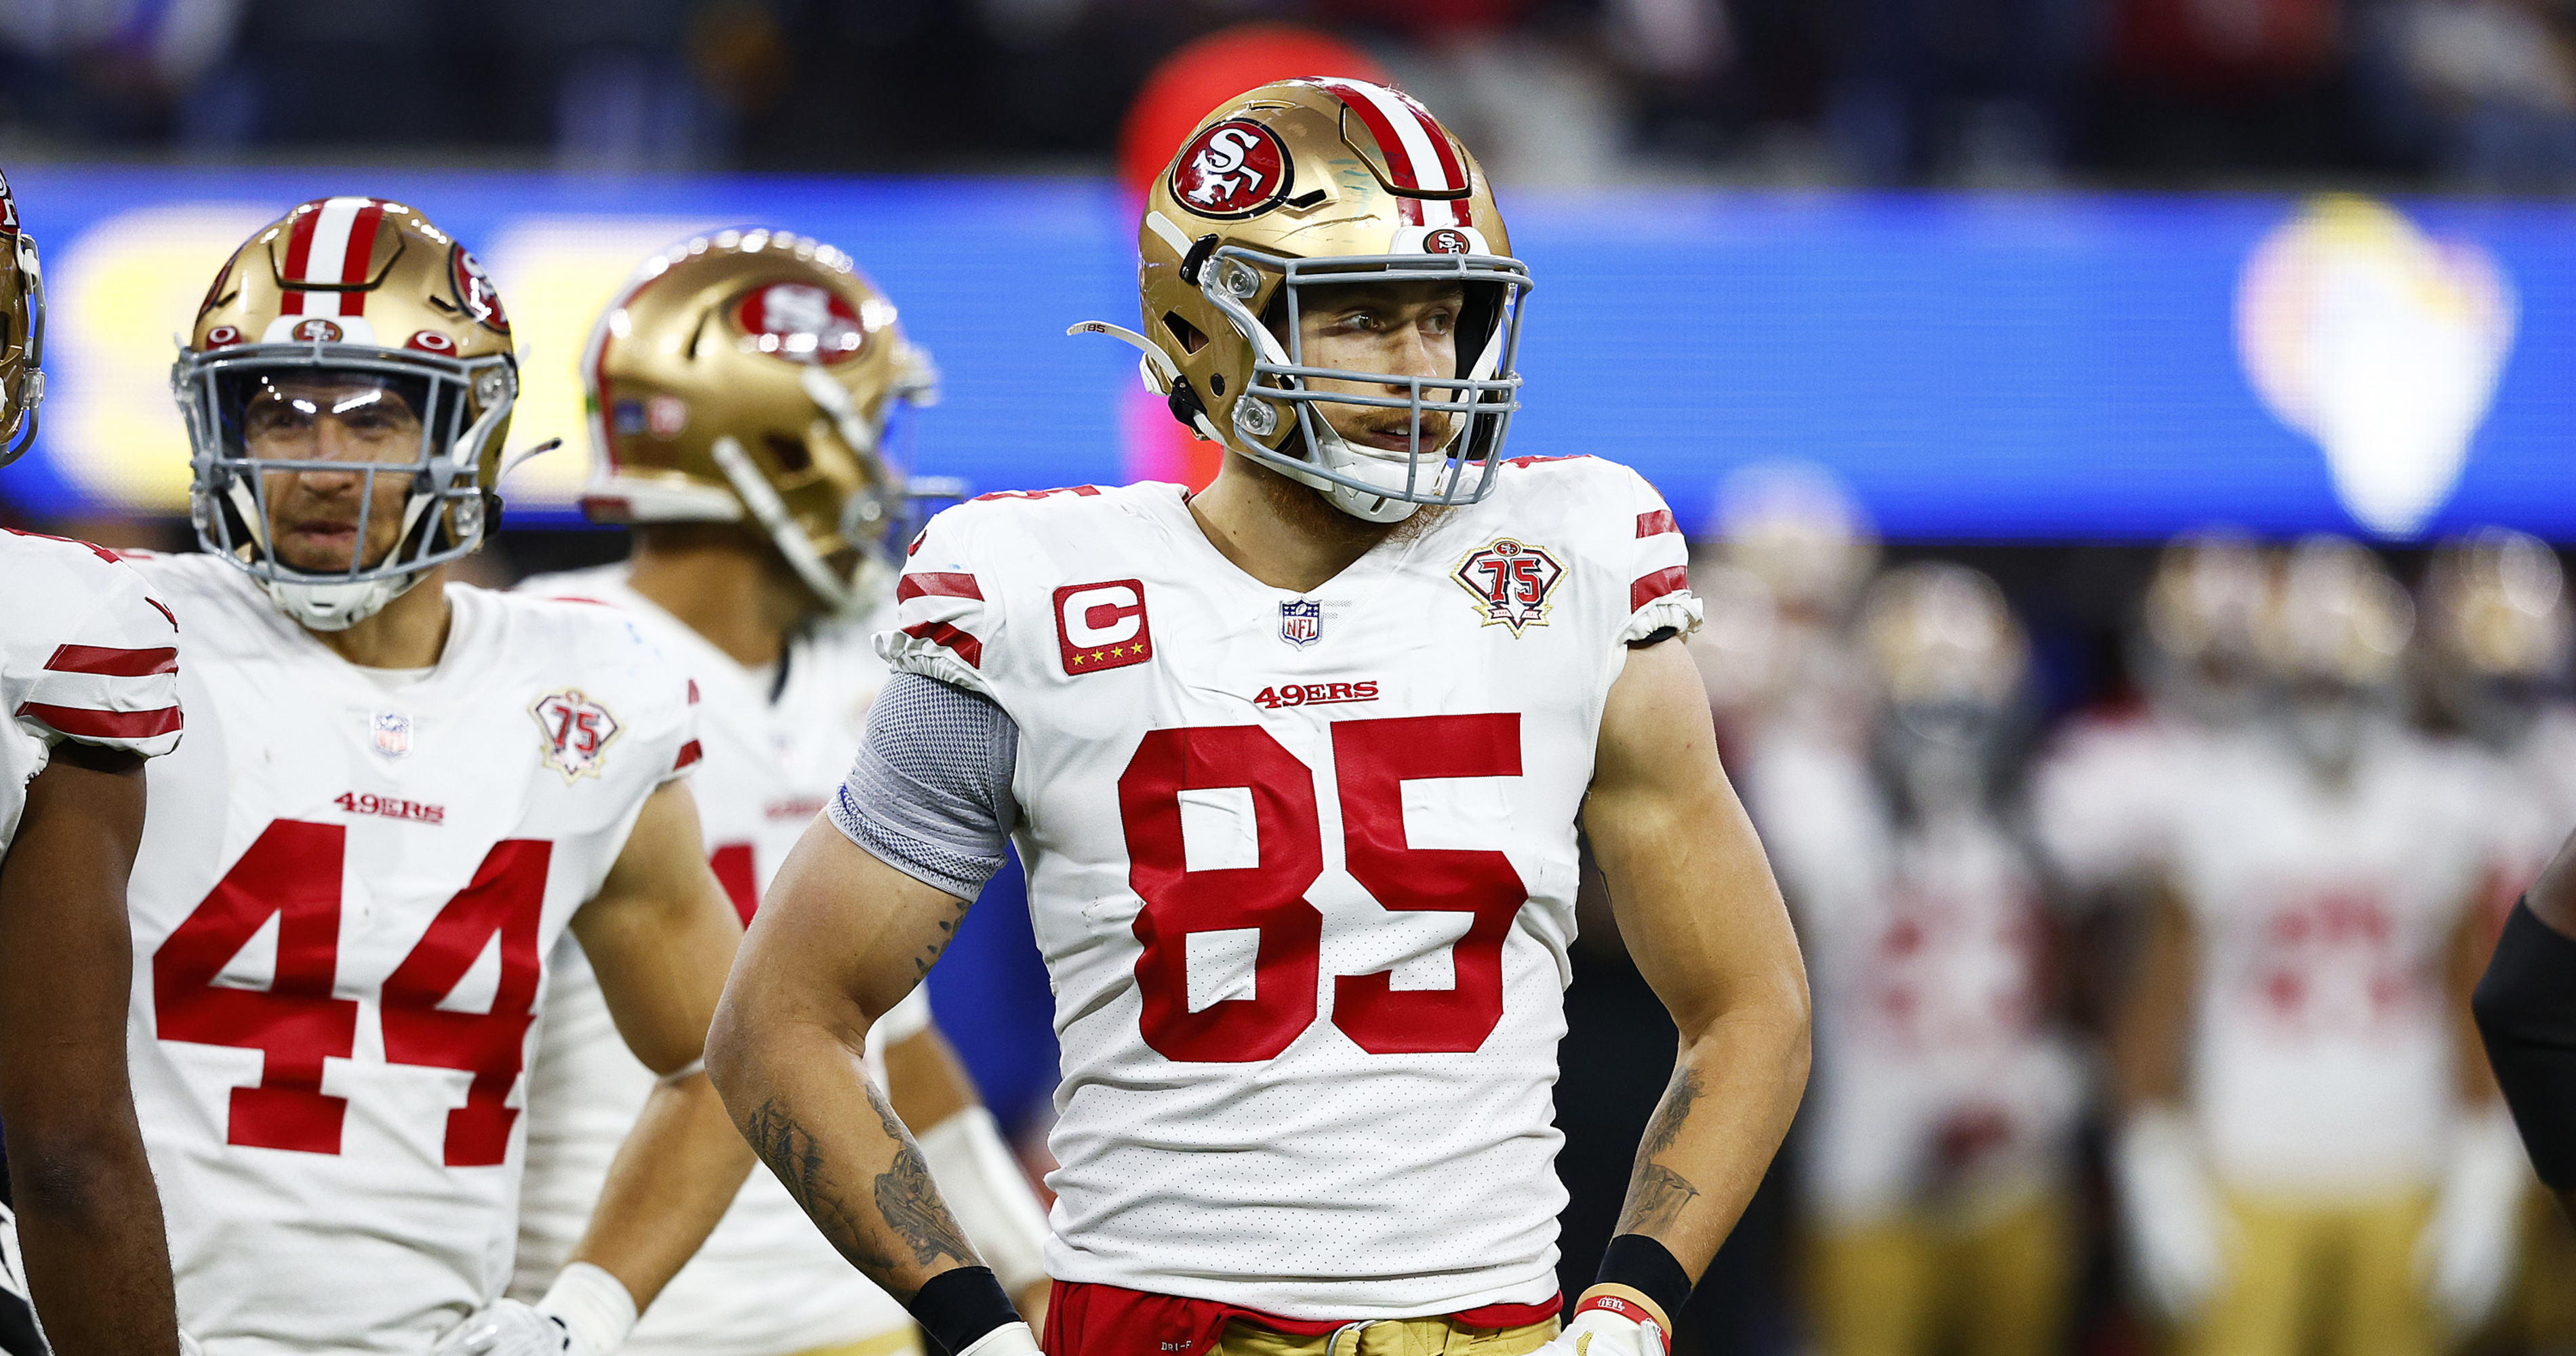 George Kittle will trade lack of catches, stats for wins